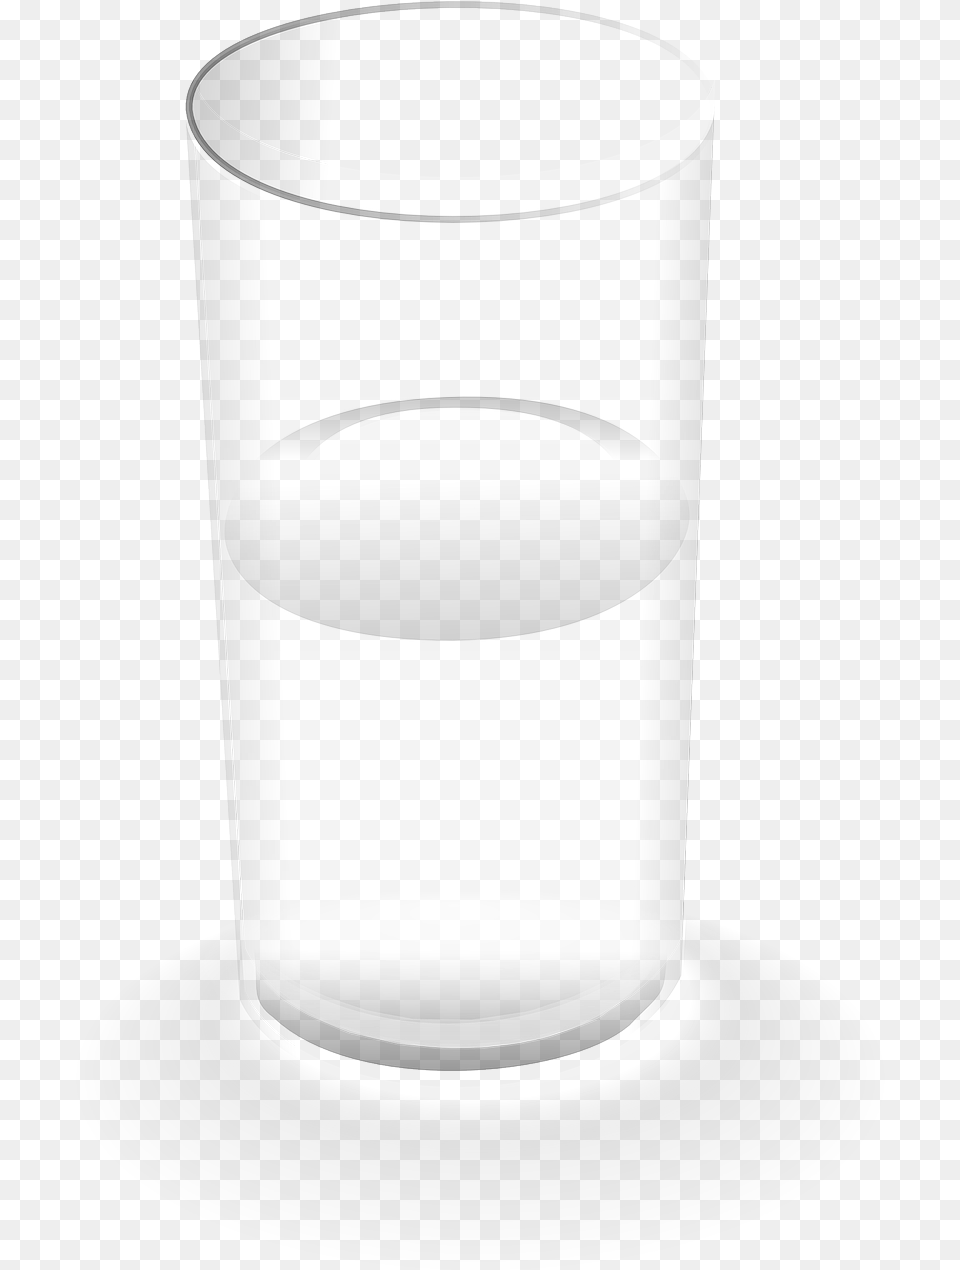 Watercupbeveragesdrinkingdrink Image From Needpixcom Drink, Cylinder, Glass, Cup Free Transparent Png